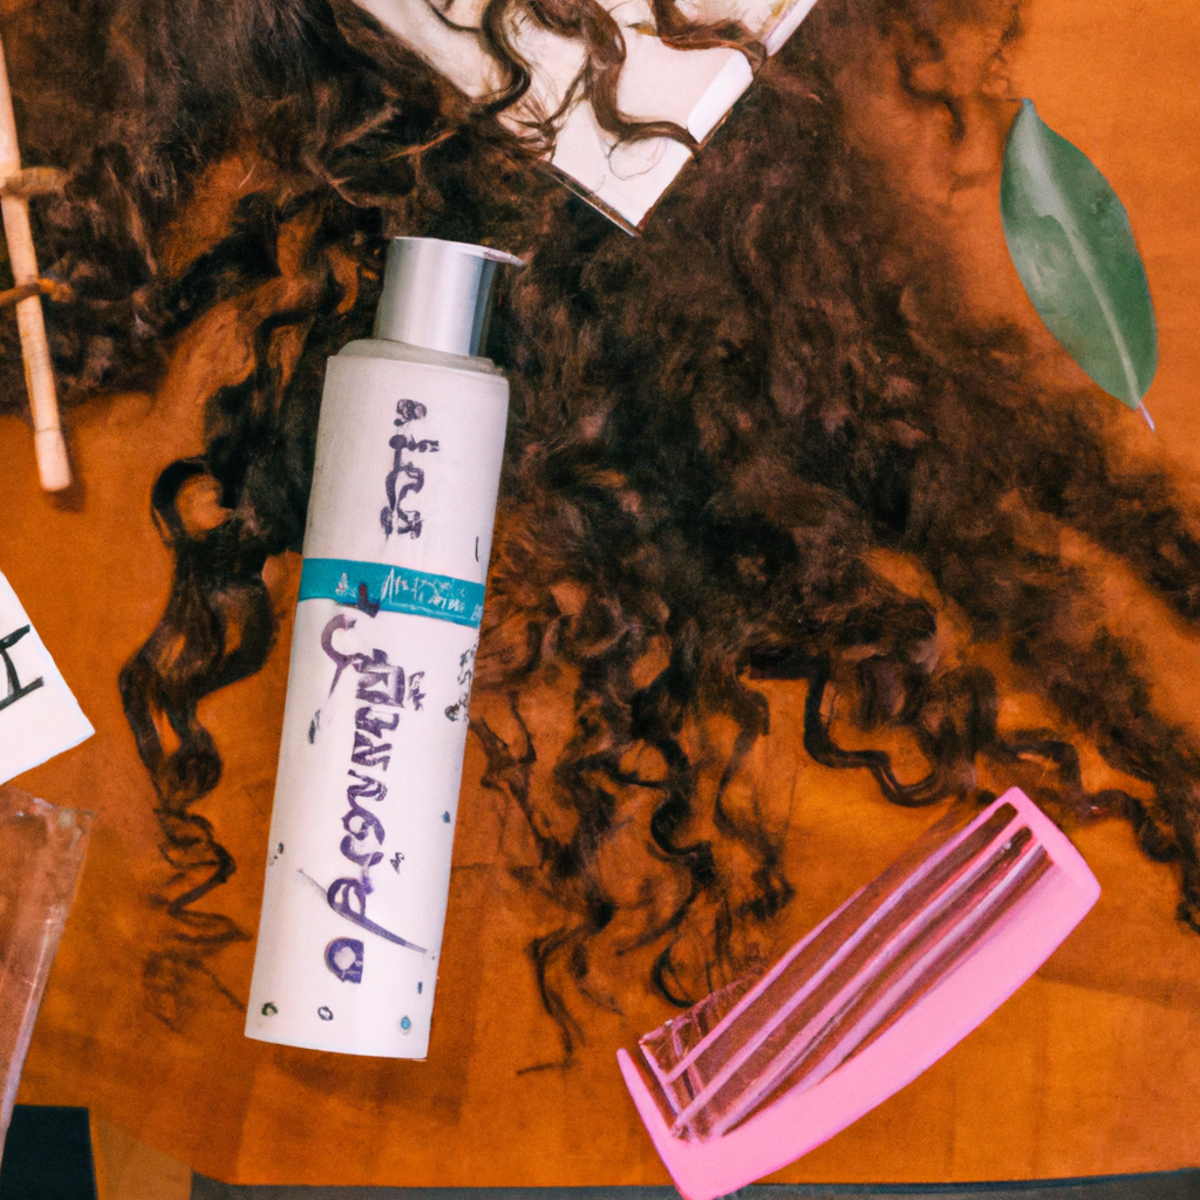 Curly hair care essentials on a wooden table, with a woman in the background applying product.